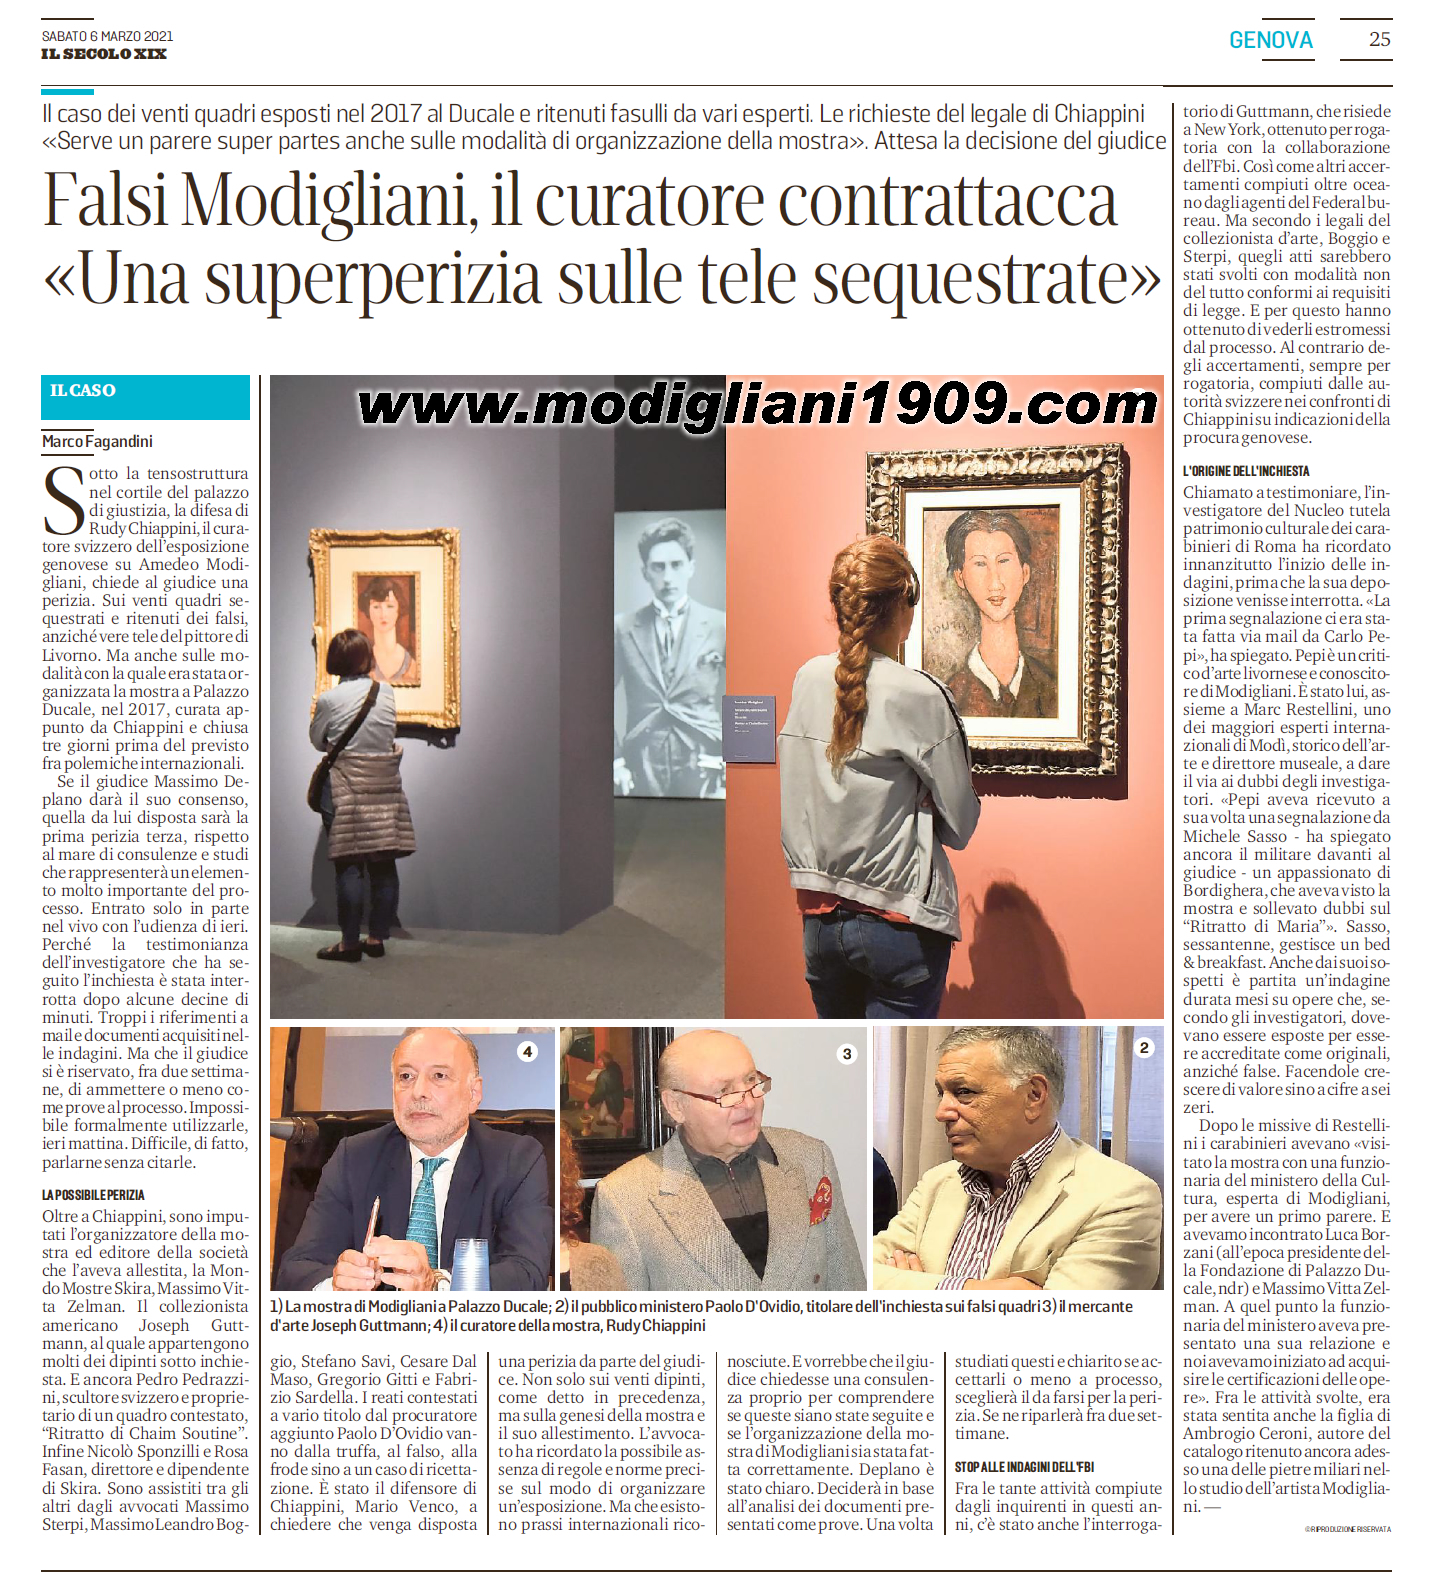 Chiappini ask «A super-expertise on the seized canvases and about the genesis of the exhibition and its set up». The Judge talks about it in two weeks